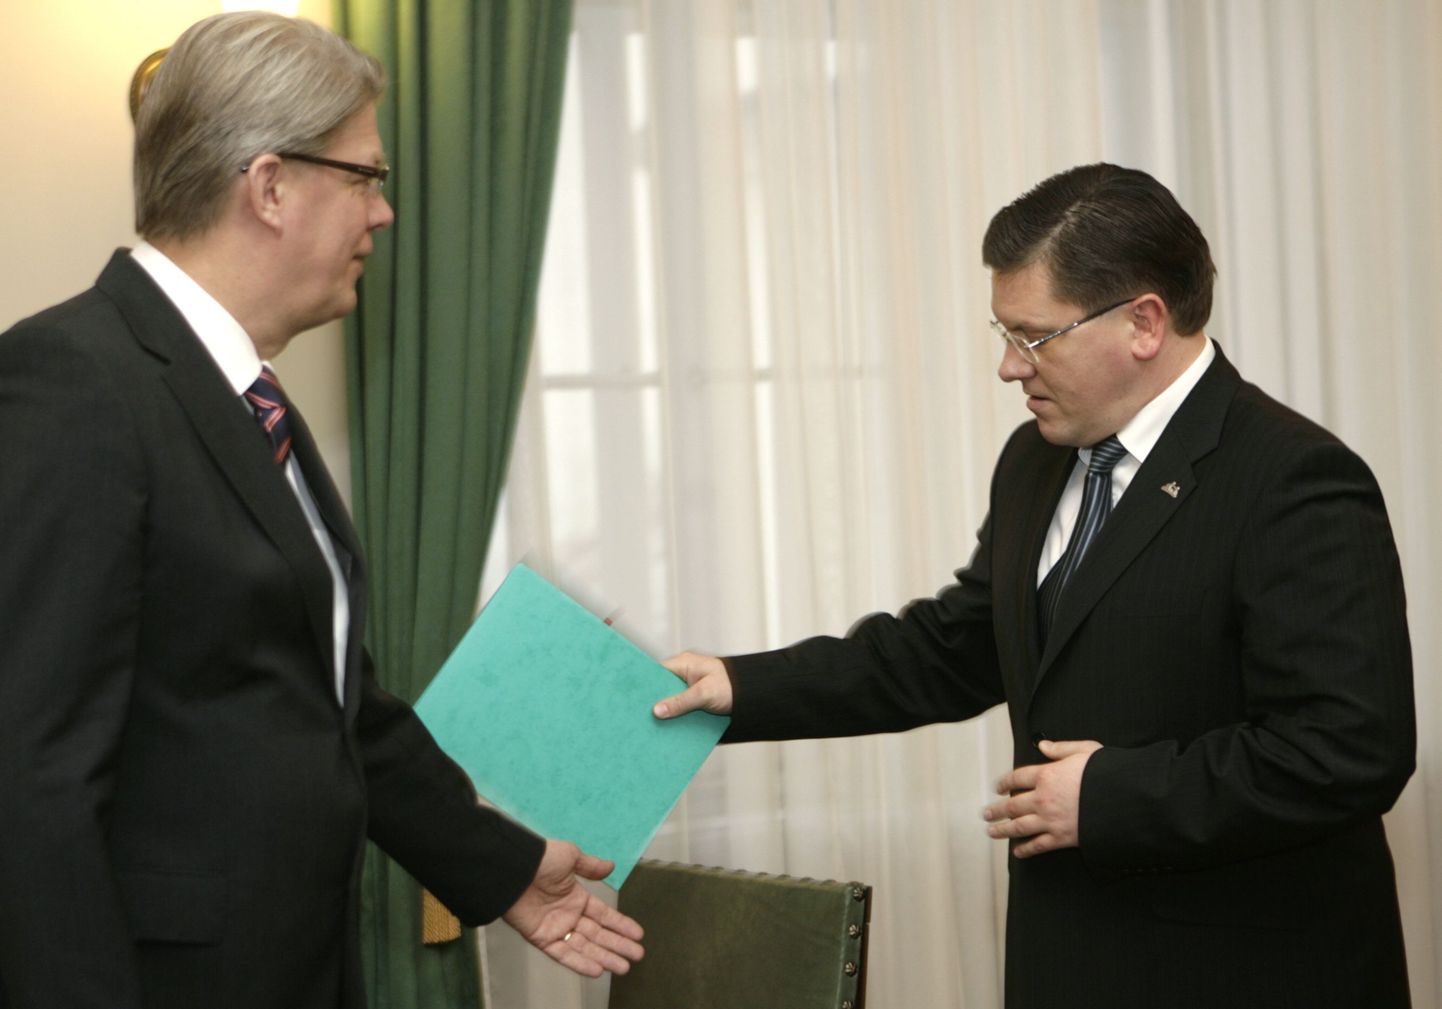 Latvia's President Valdis Zatlers (L) invites Minister of Interior Affairs Mareks Seglins to meeting in Riga January 14, 2009. Zatlers, speaking after riots in the economically troubled nation, threatened on Wednesday to take steps to dissolve parliament if it failed soon to give people more rights to force early elections. REUTERS/Ints Kalnins (LATVIA)